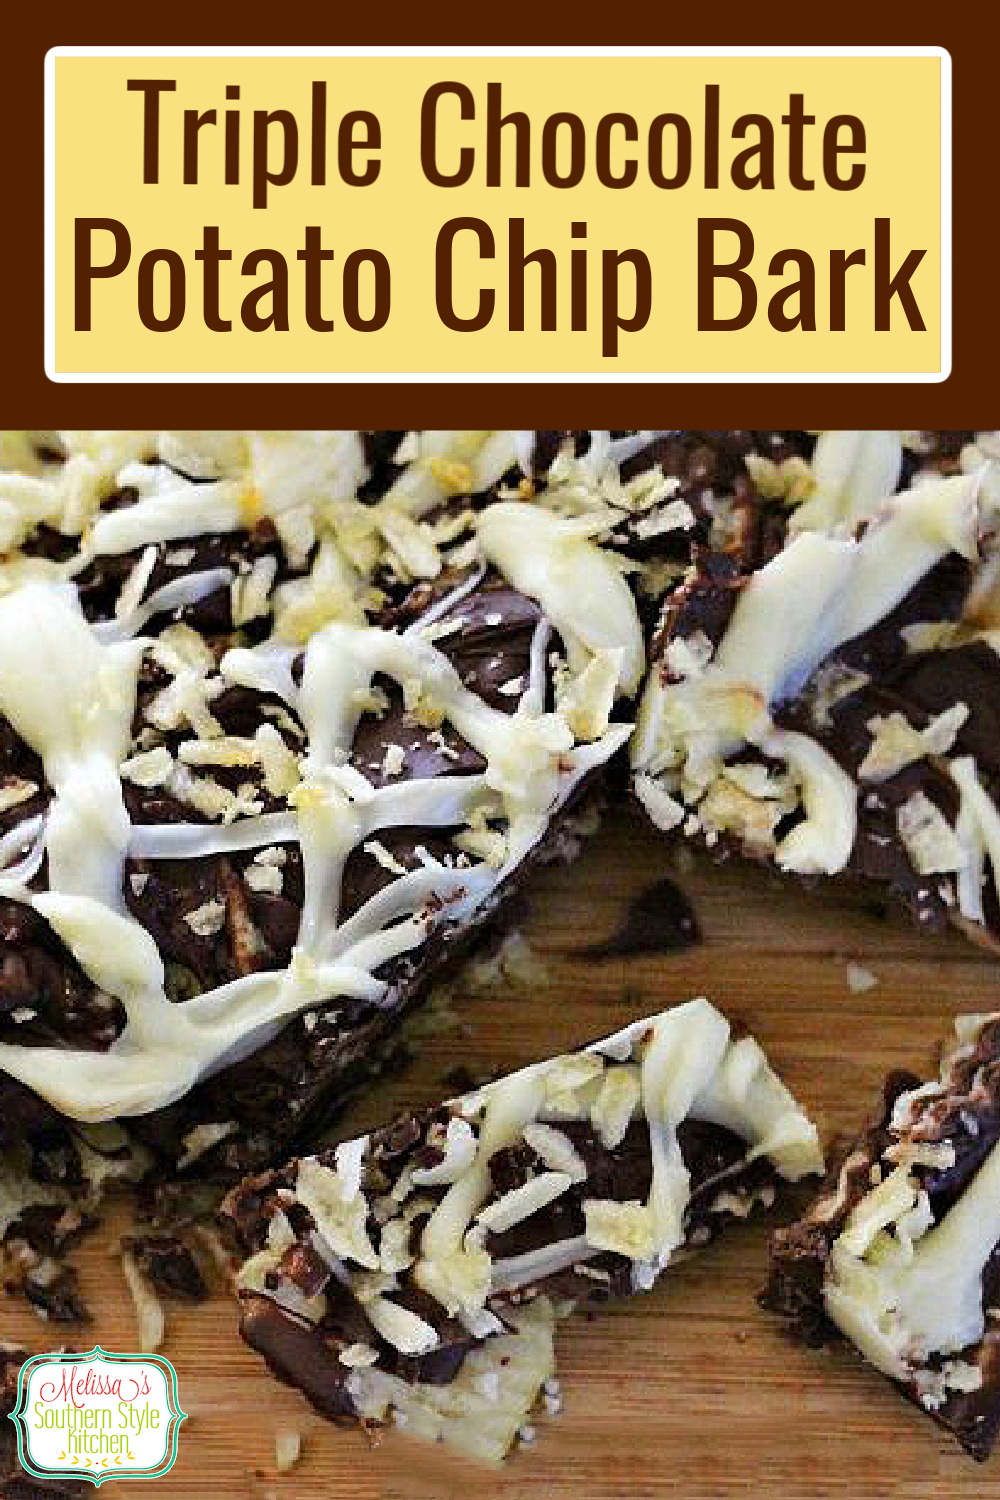 This Triple Chocolate Potato Chip Bark is a must-make for the sweet and salty fans in your life #potatochips #potatochipbark #candybarkrecipes #triplechocolate #candy #chocolatebark #chocolatedippedpotatochipsrecipe via @melissasssk